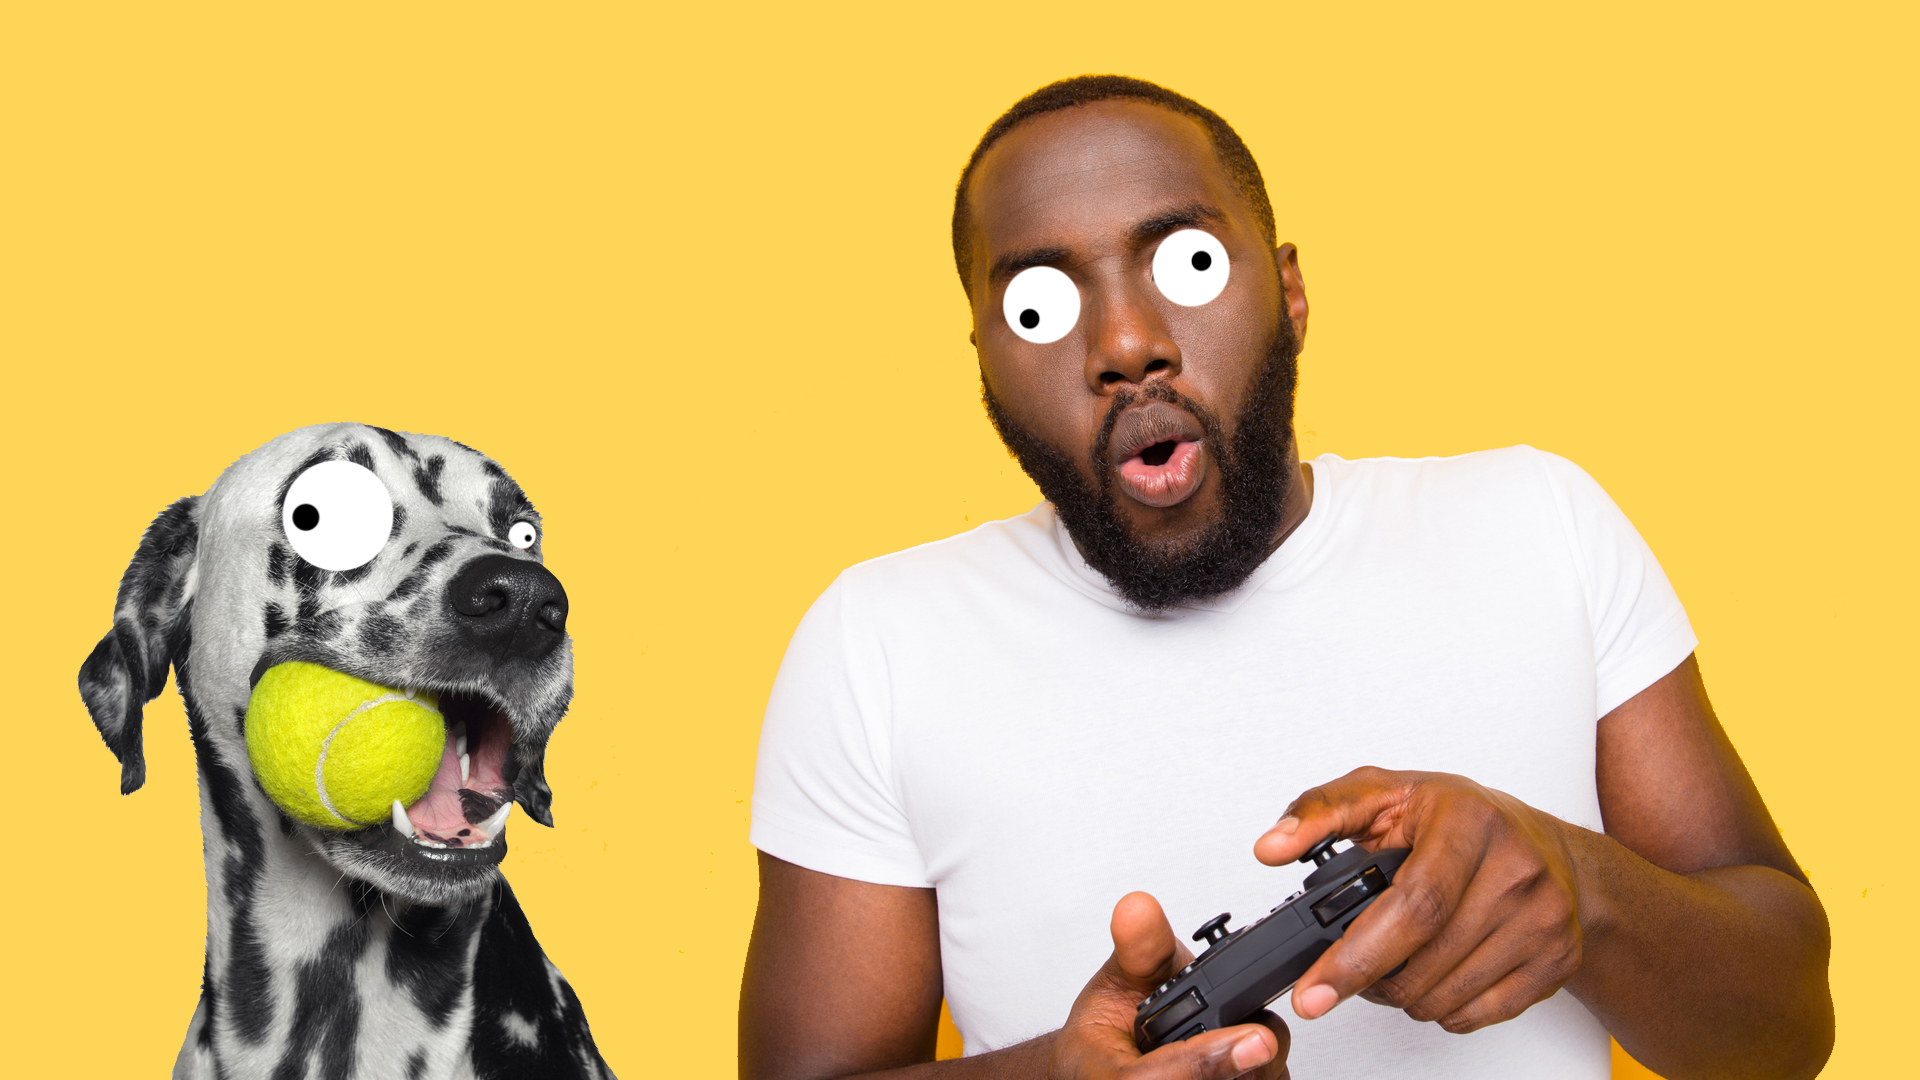 A man and dog enjoy a video game